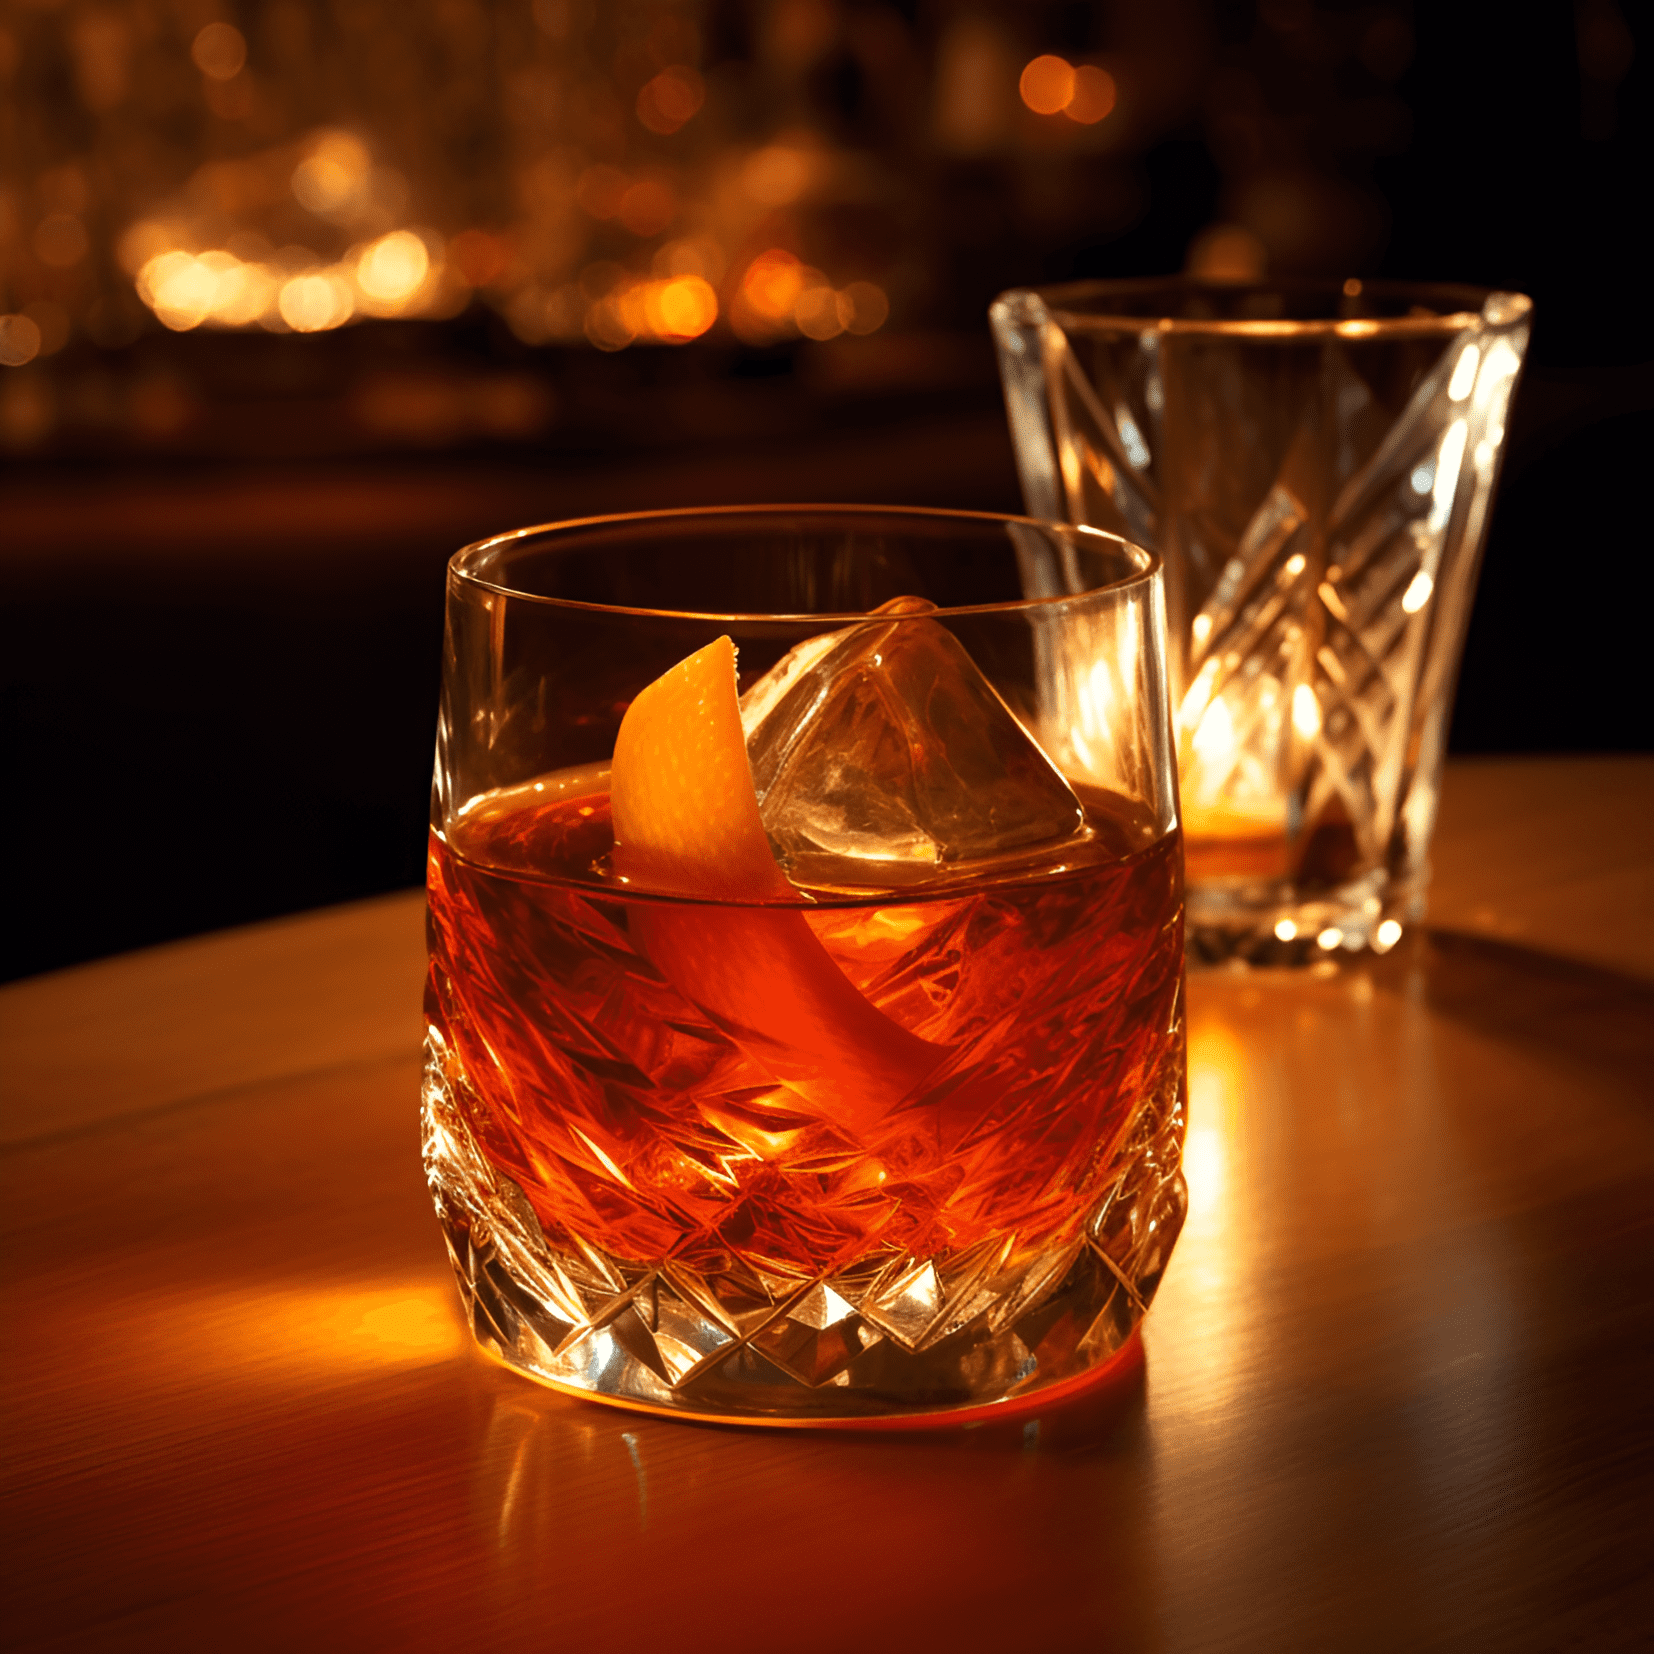 Nelson's Blood Cocktail Recipe - Nelson's Blood cocktail has a rich, bold, and complex taste. It is both sweet and slightly bitter, with a strong presence of dark, aged spirits. The cocktail is warming and full-bodied, with a smooth finish.